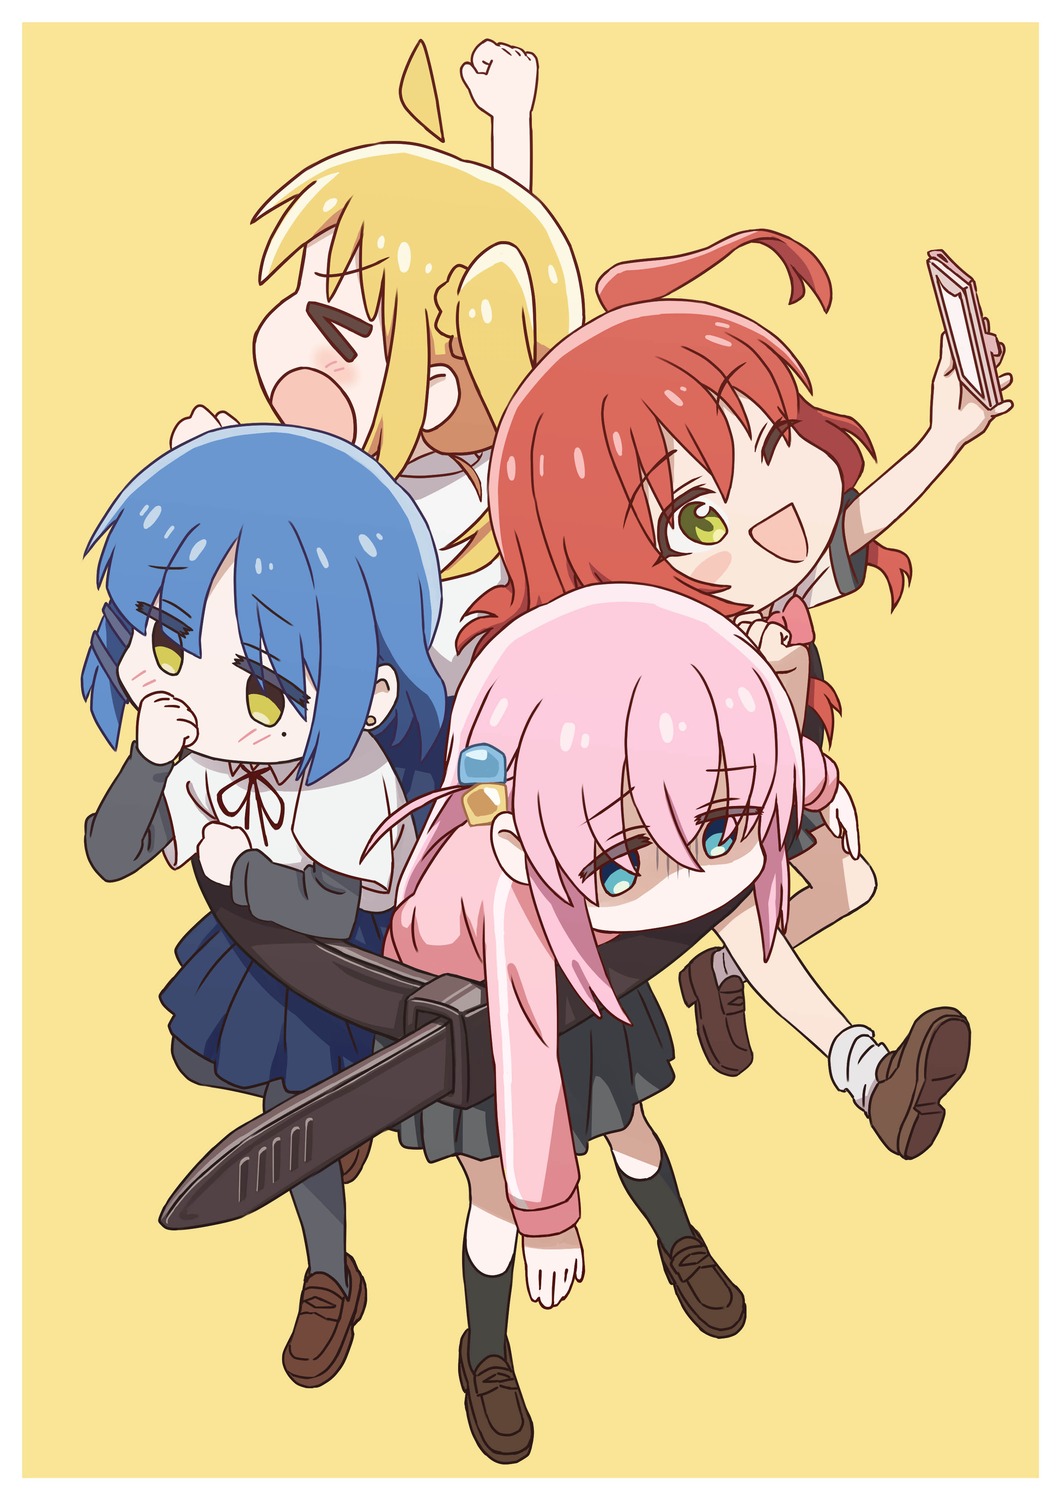 Draw your character in bocchi the rock chibi style by Yamuma